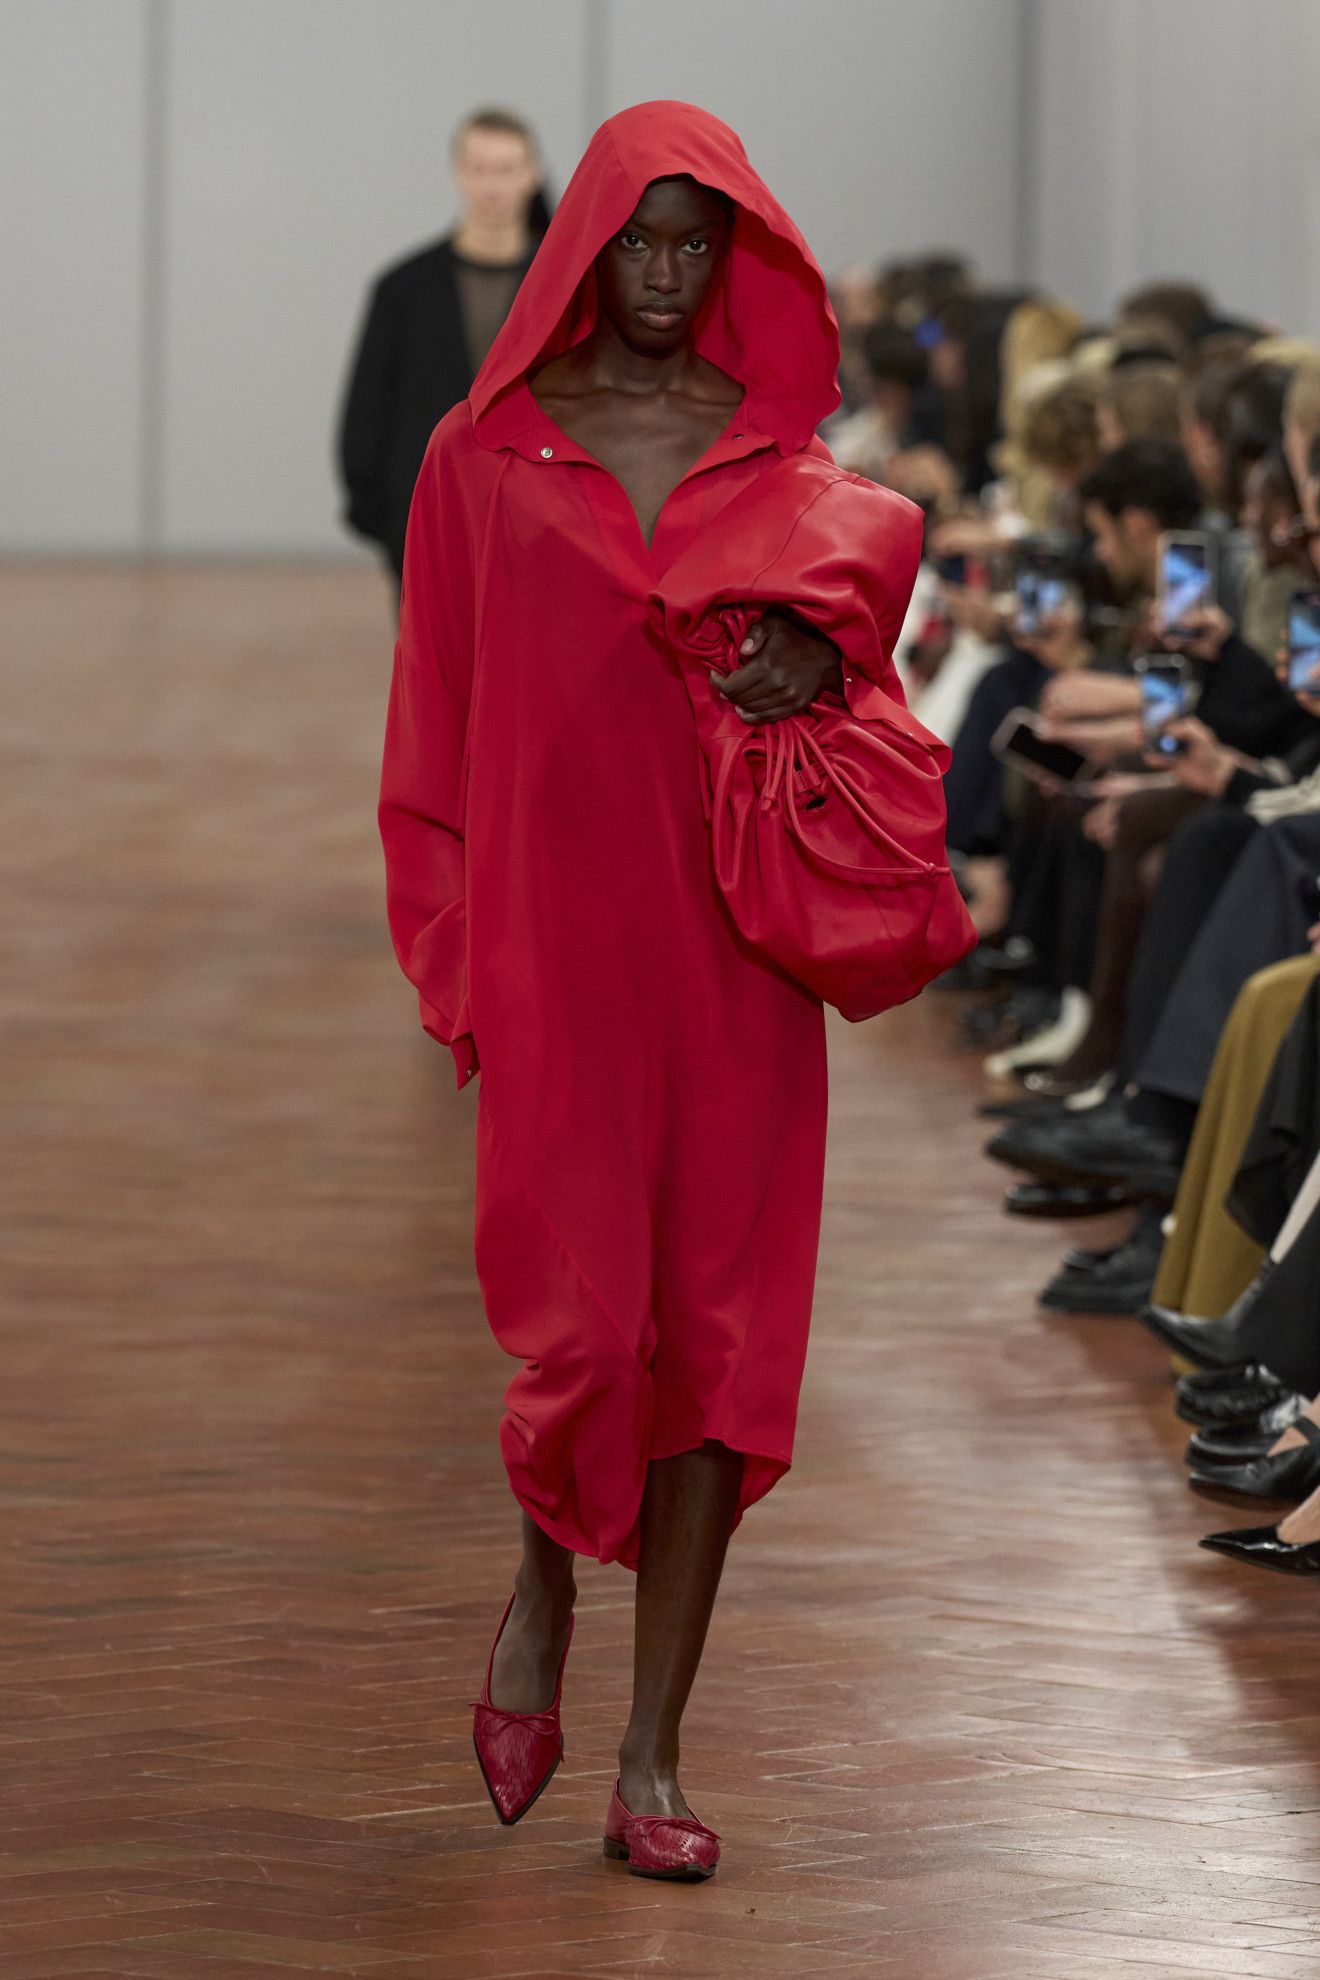 a person wearing a red robe